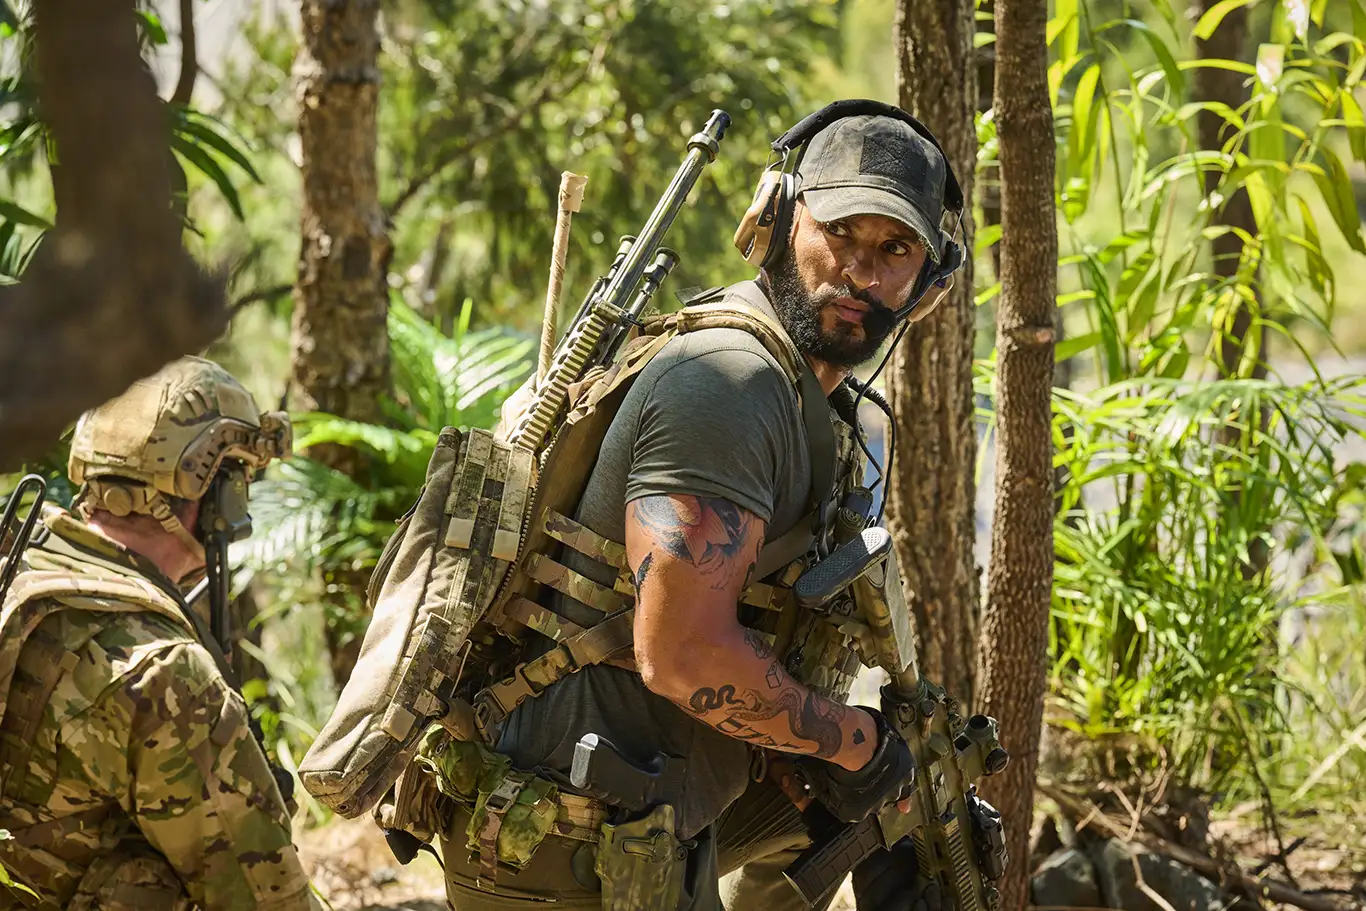 Ricky Whittle Talks His Latest Land of Bad